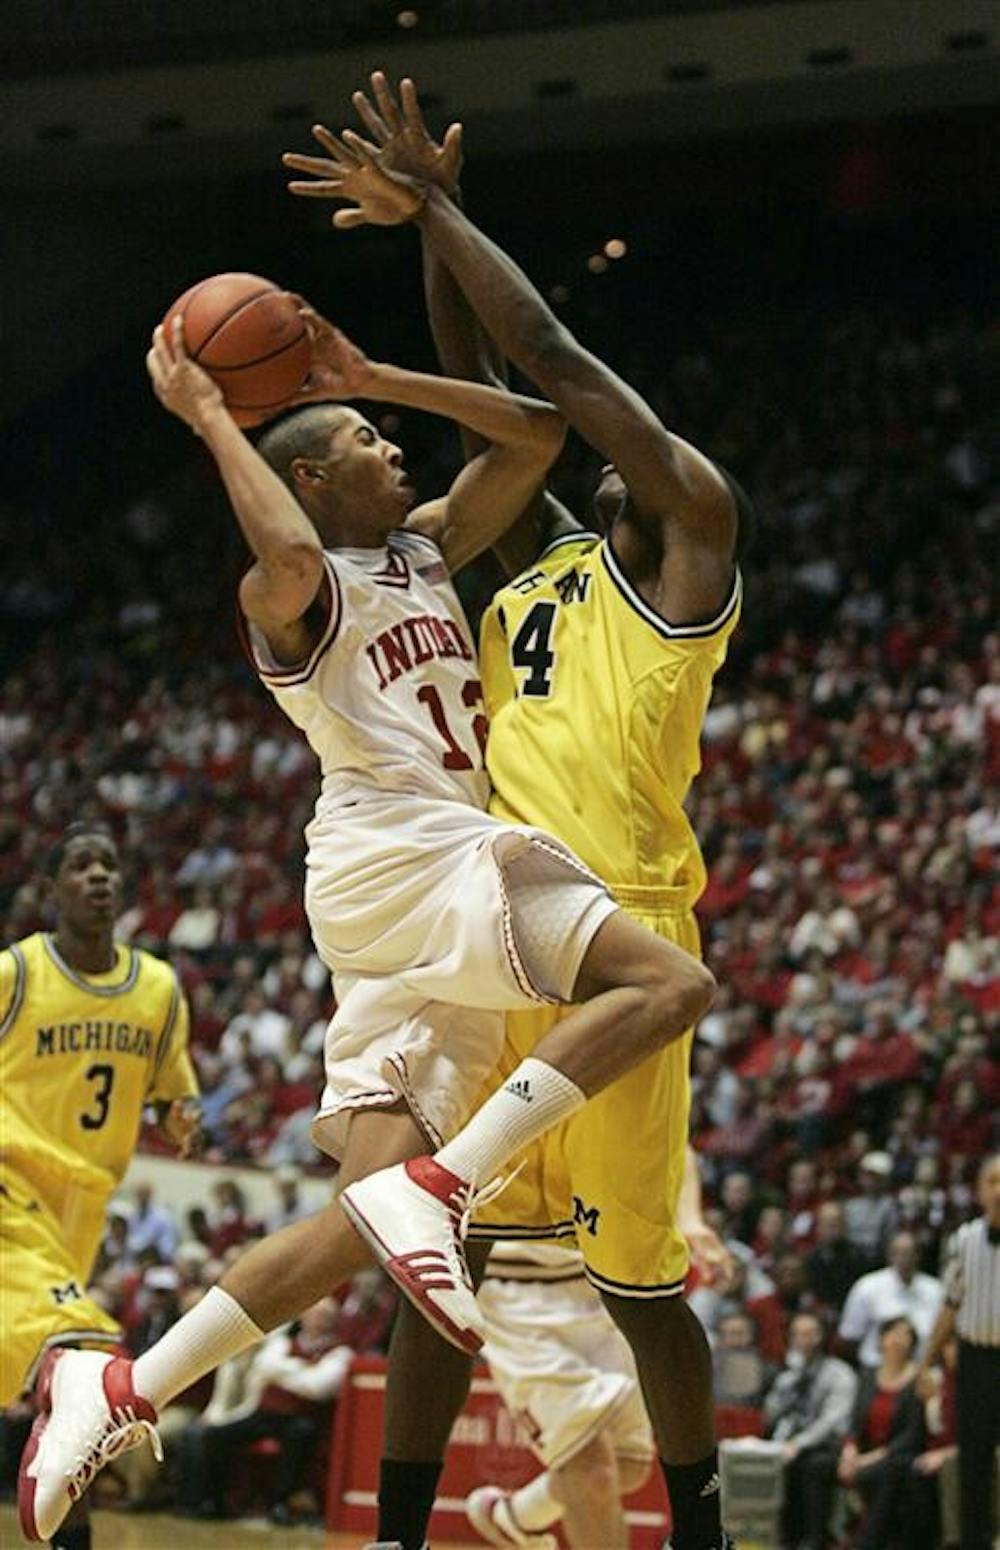 Freshman guard Verdell Jones goes for a baket as Michigan's DeShawn Sims attempts a block Wednesday at Assembly Hall. The Hoosiers face Illinois on the road this Saturday.